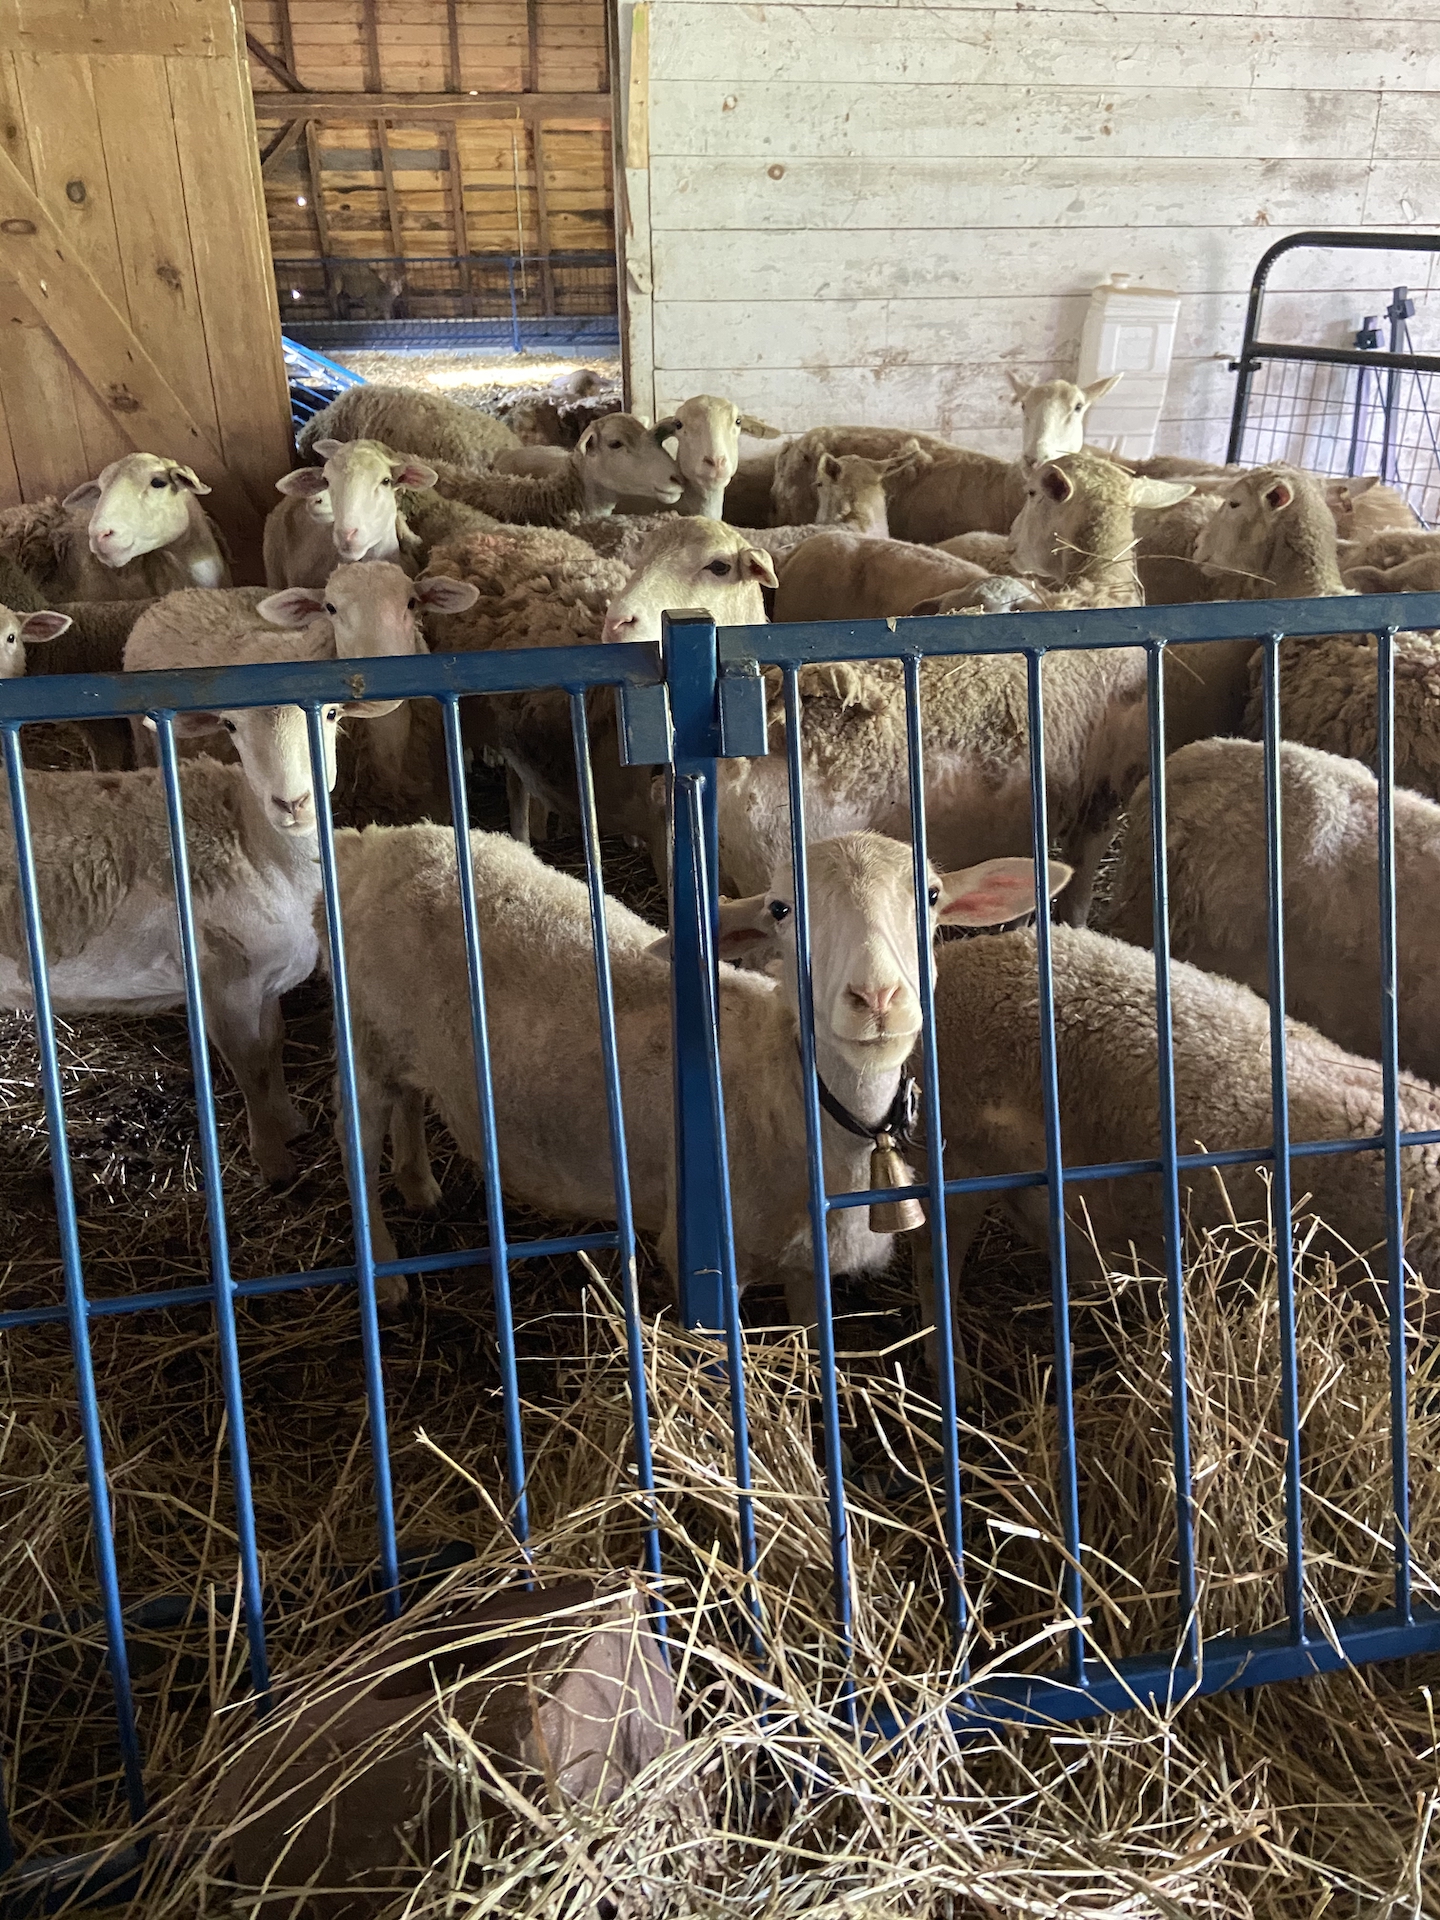 A flock of sheep in a barn